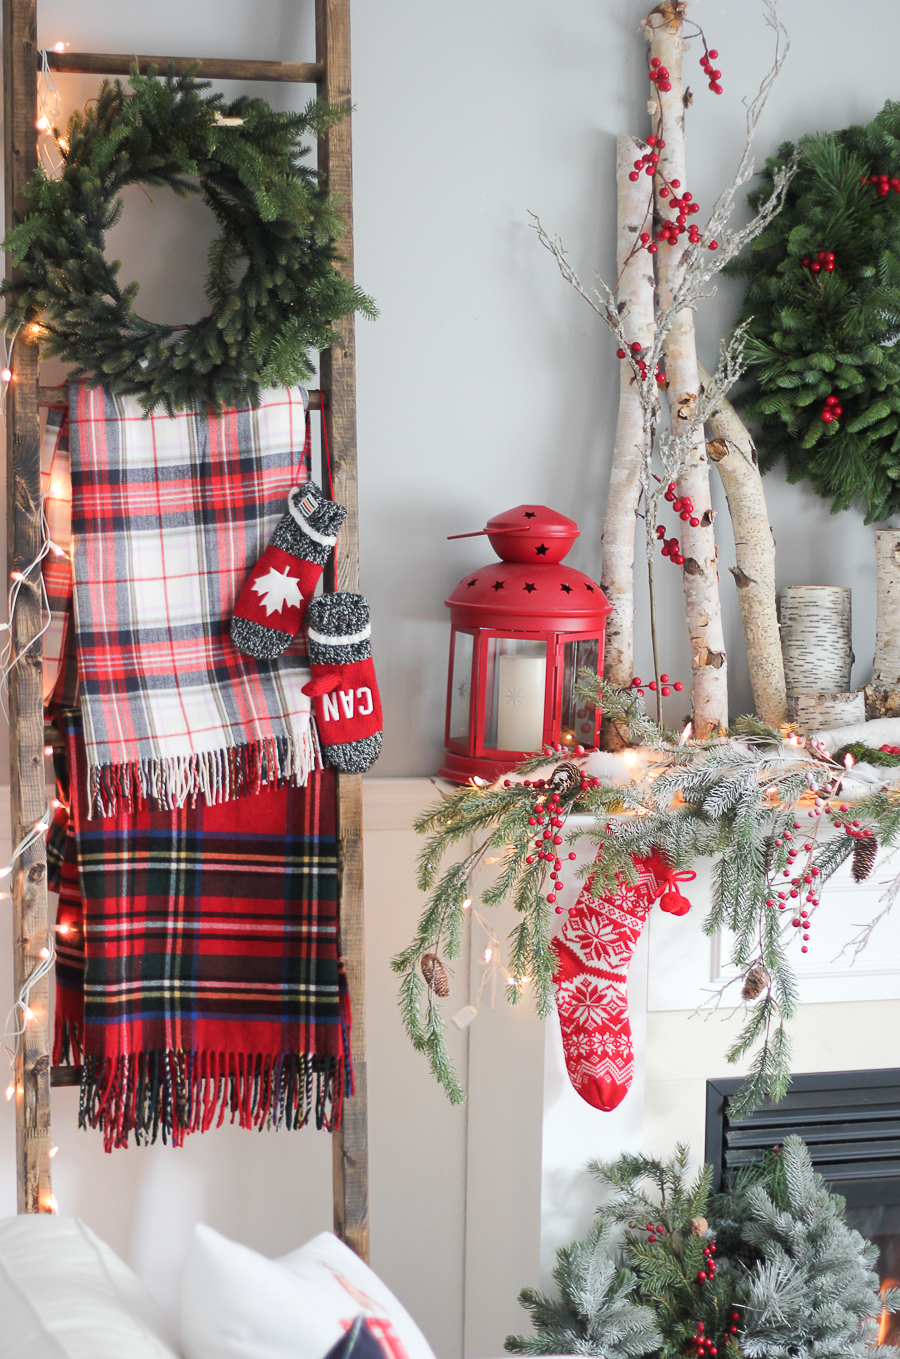 A wooden blanket ladder with plaid blankets and a wreath on it.